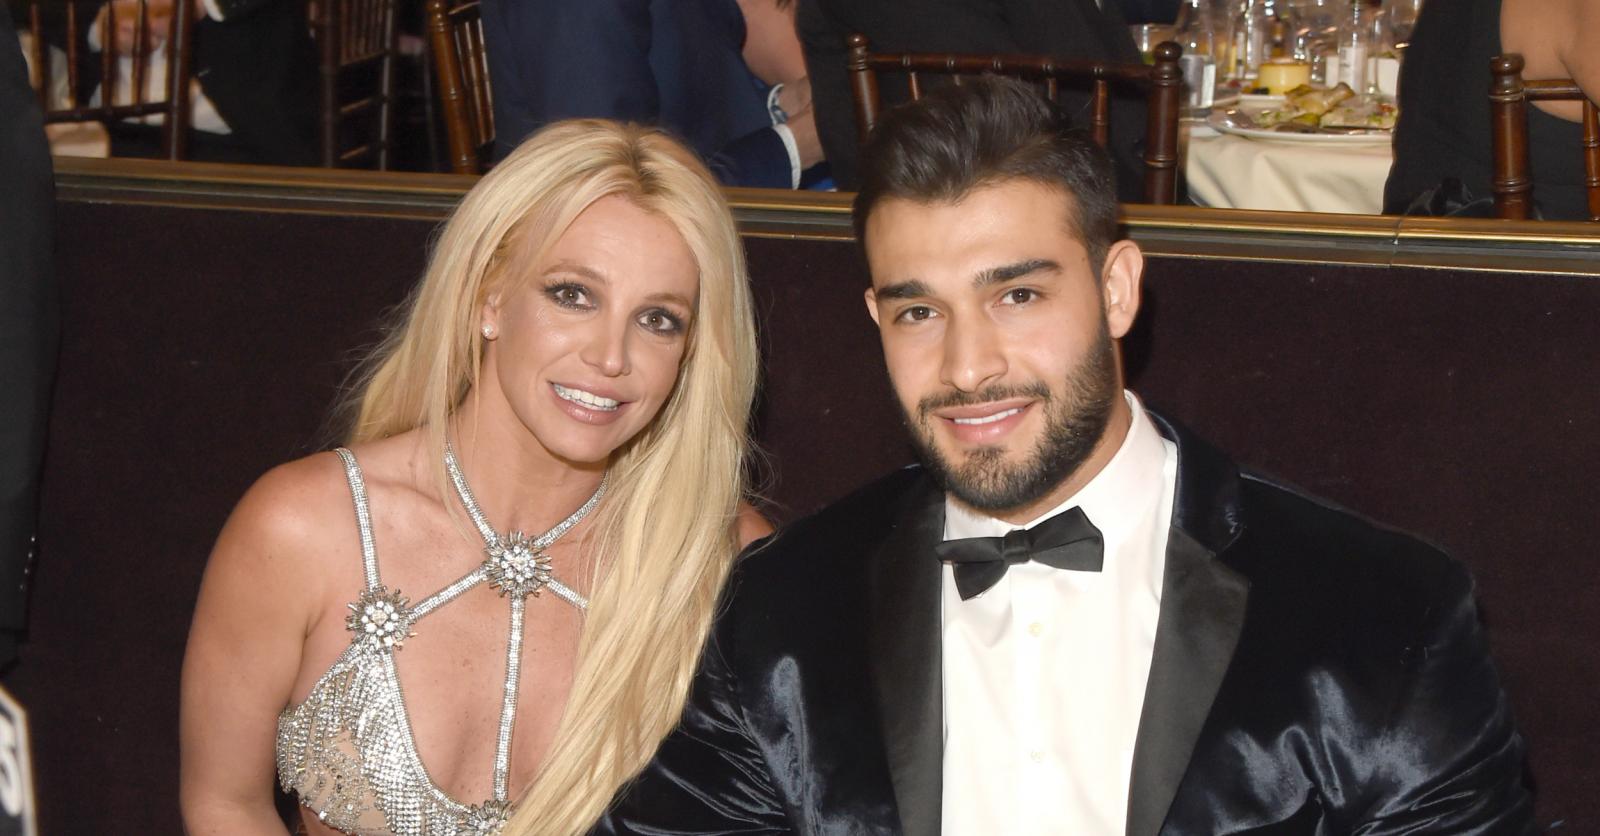 Britney Spears (41) responds for the first time to the breakup